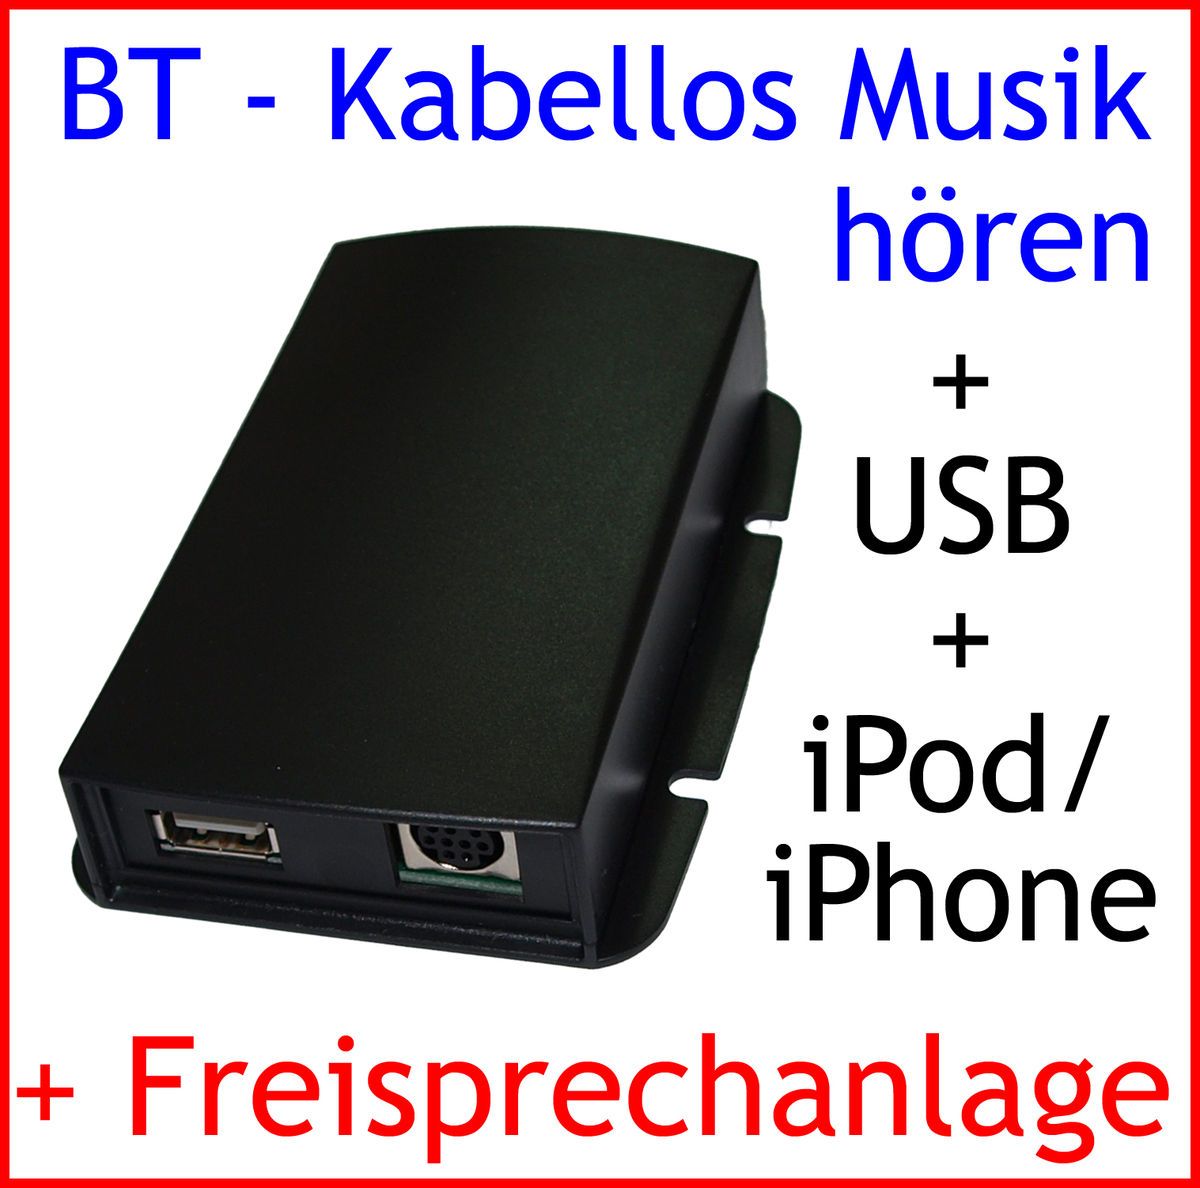 /iPhone 1 4S + Bluetooth Adapter VW RCD/RNS 200/210 300/310 2